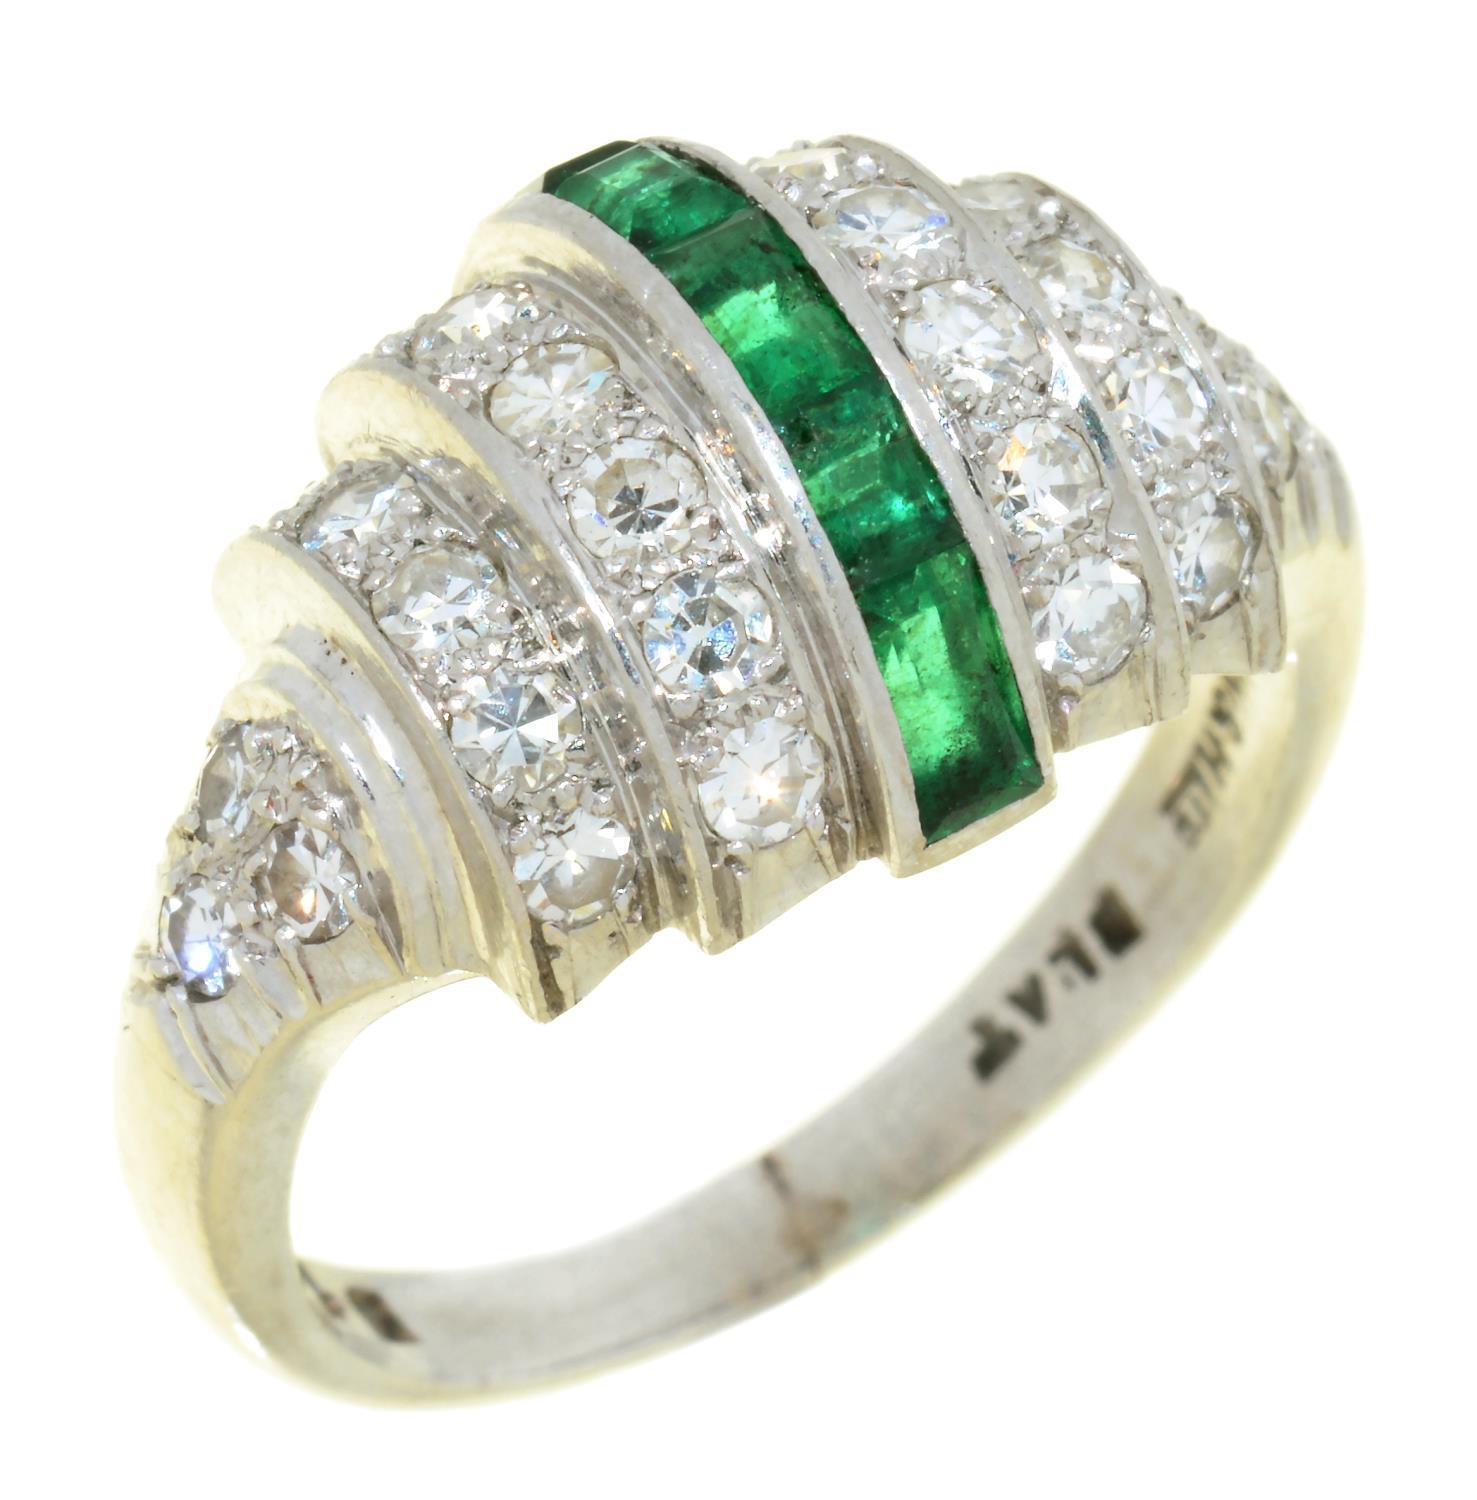 AN ART DECO EMERALD AND DIAMOND COCKTAIL RING with central line of calibre cut emeralds, in